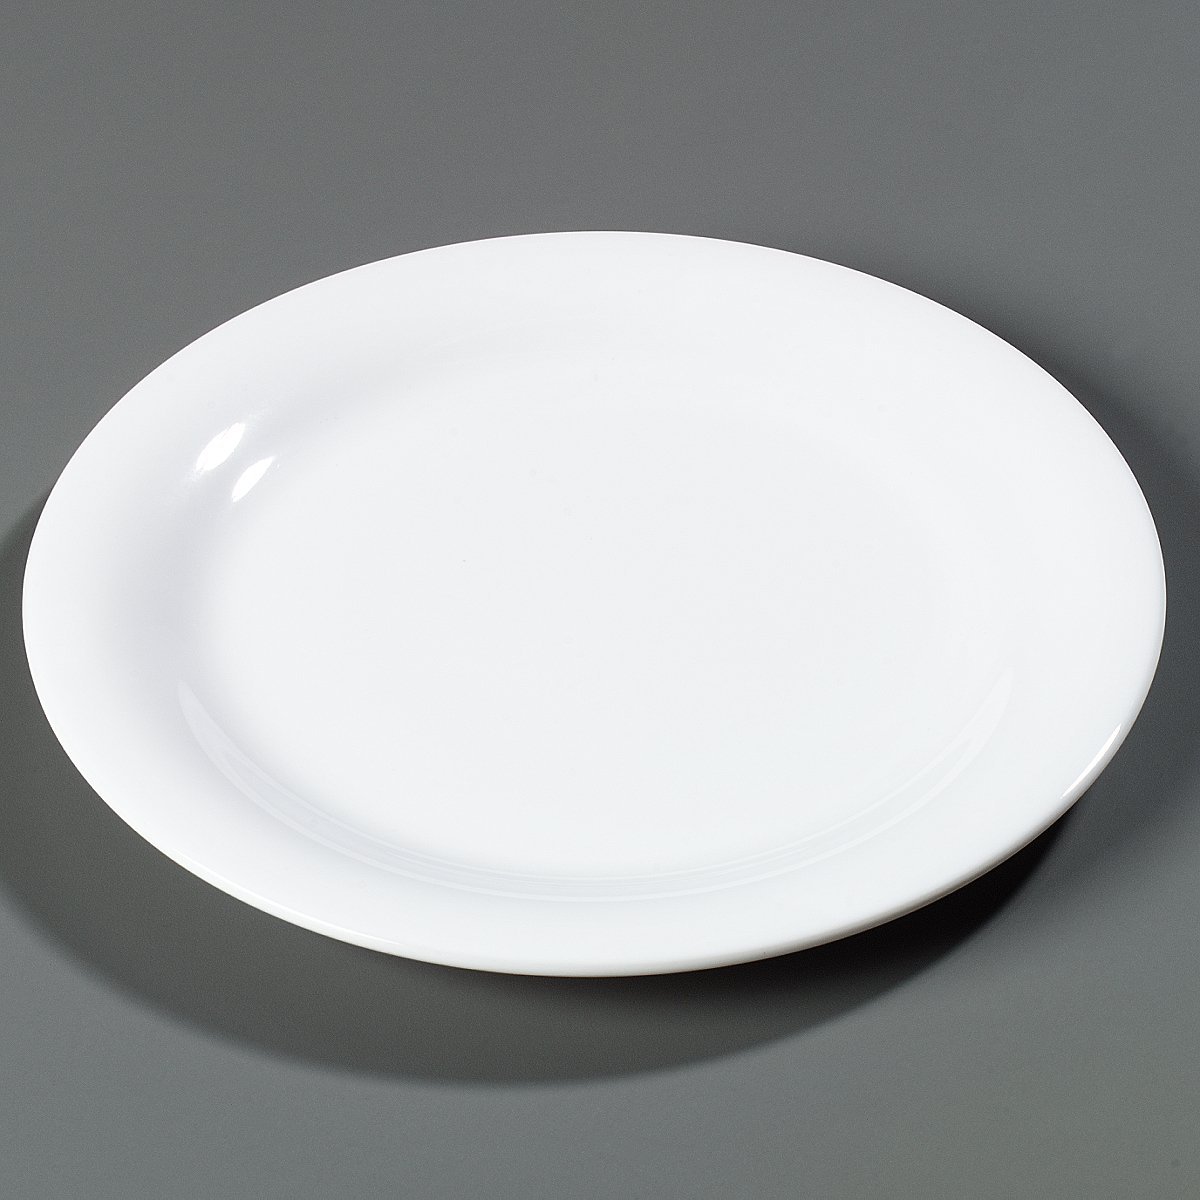 Carlisle FoodService Products Sierrus Reusable Plastic Plate with Narrow Rim for Buffets, Restaurants, and Homes, Melamine, 9 Inches, White, (Pack of 24)